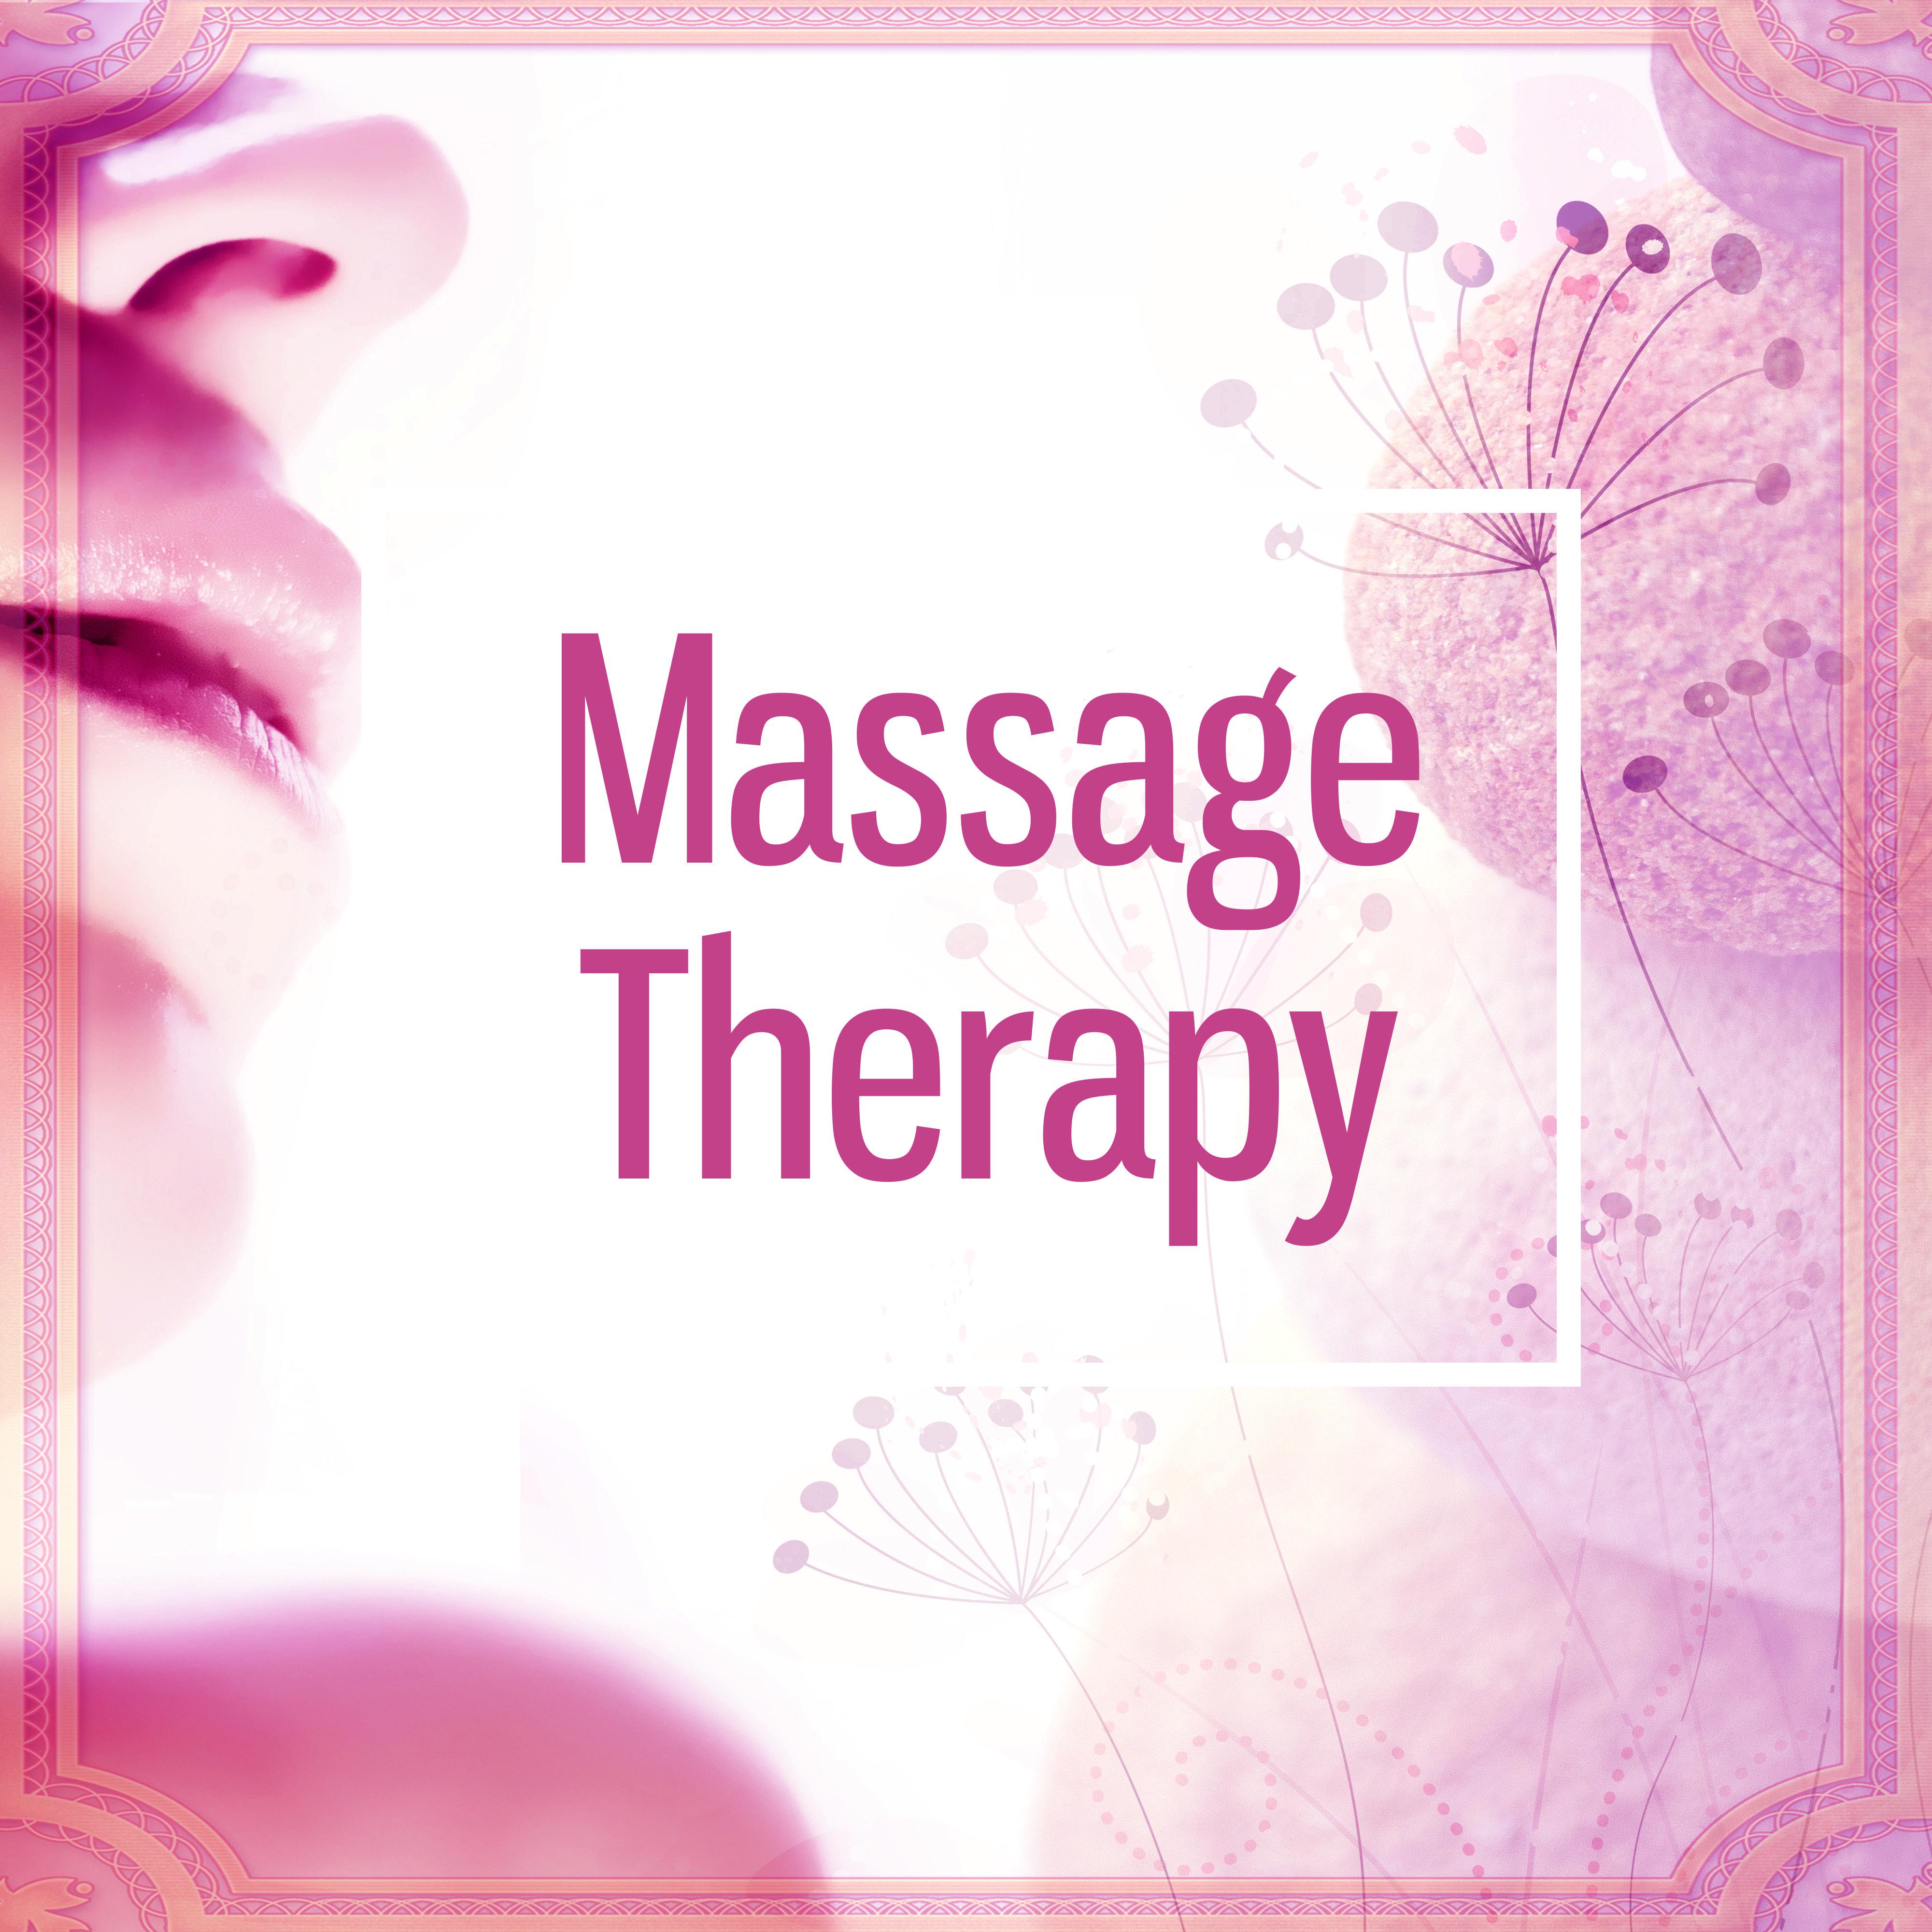 Massage Therapy  Deep Sounds for Relaxation, Sensual Massage, Serenity  Calmness, Inner Peace, New Age Music